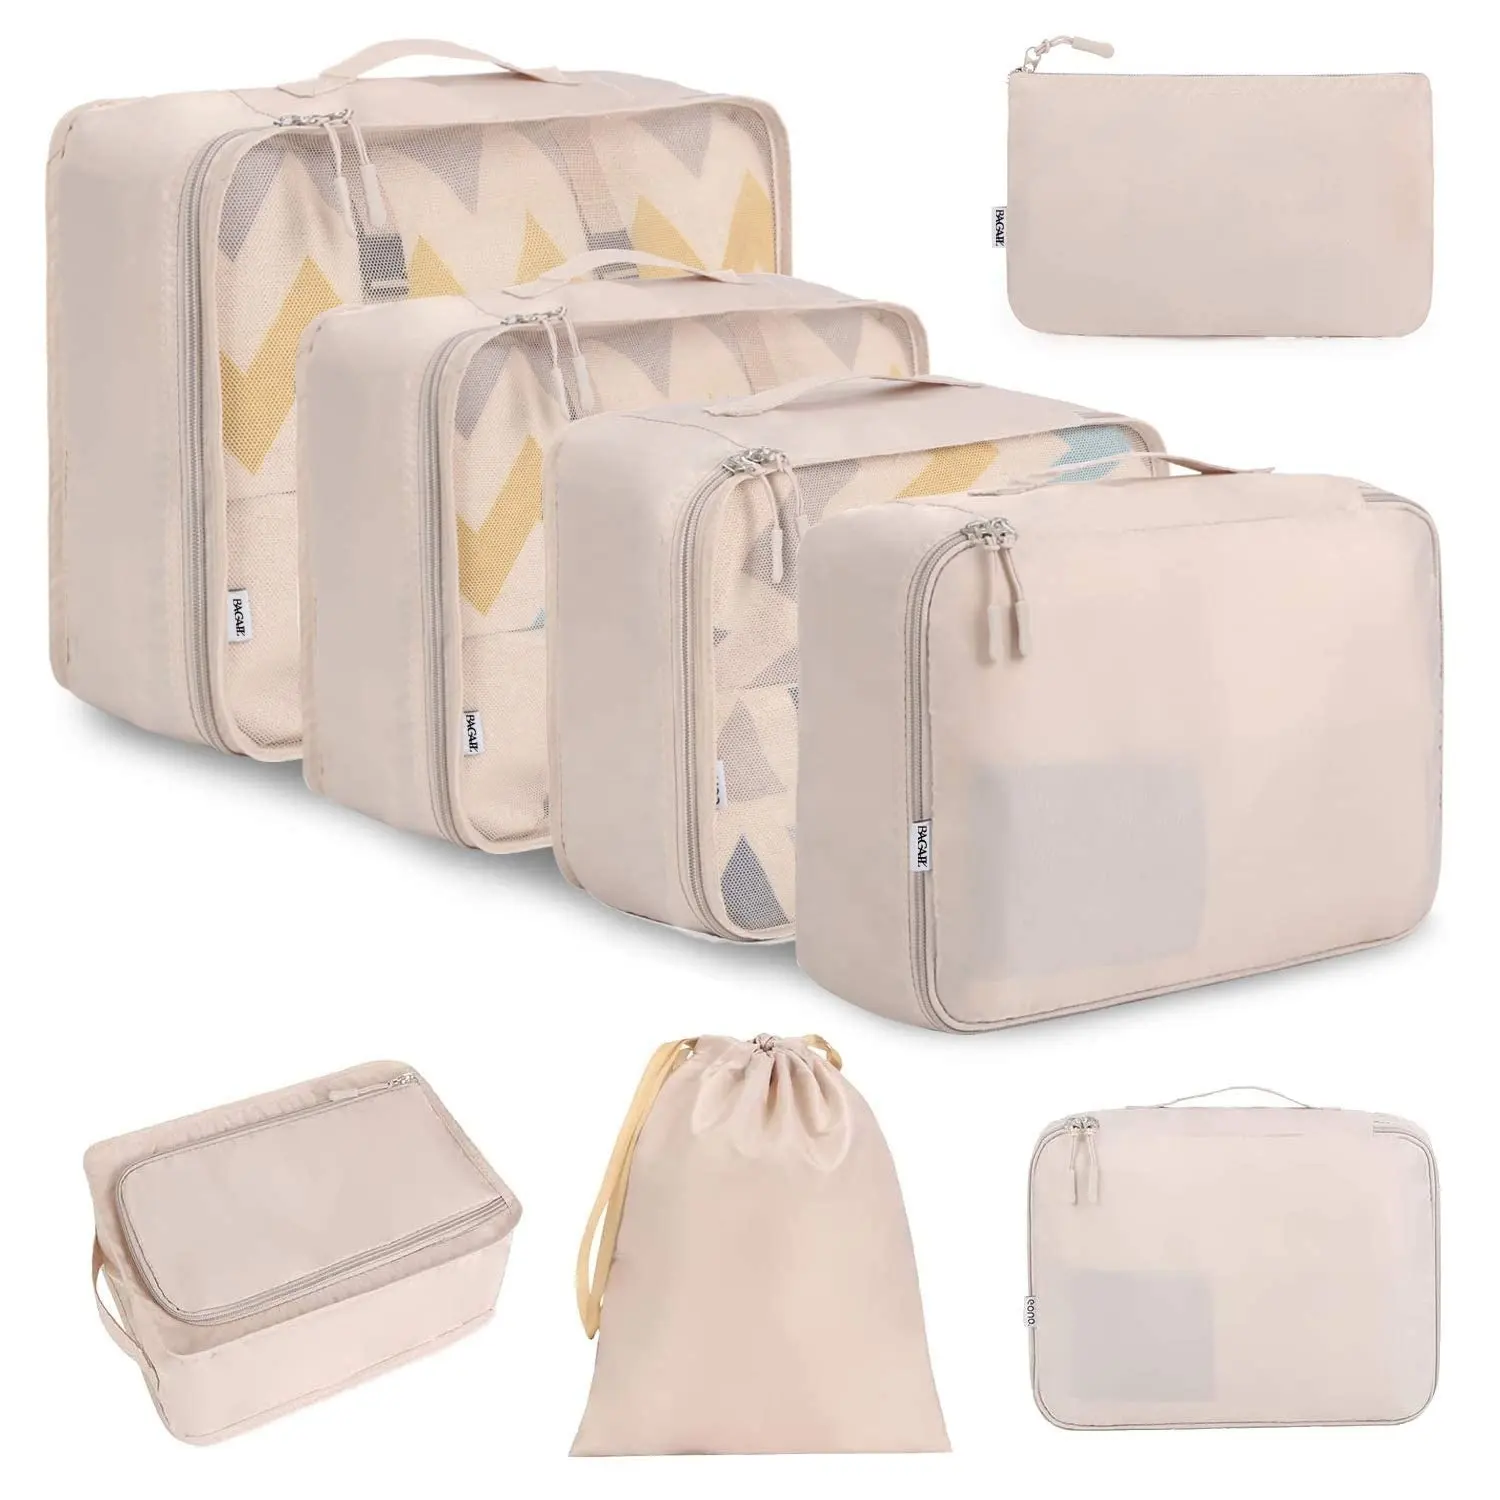 2023 New 8 Set Packing Cubes Luggage Packing Organizers for Travel Accessories